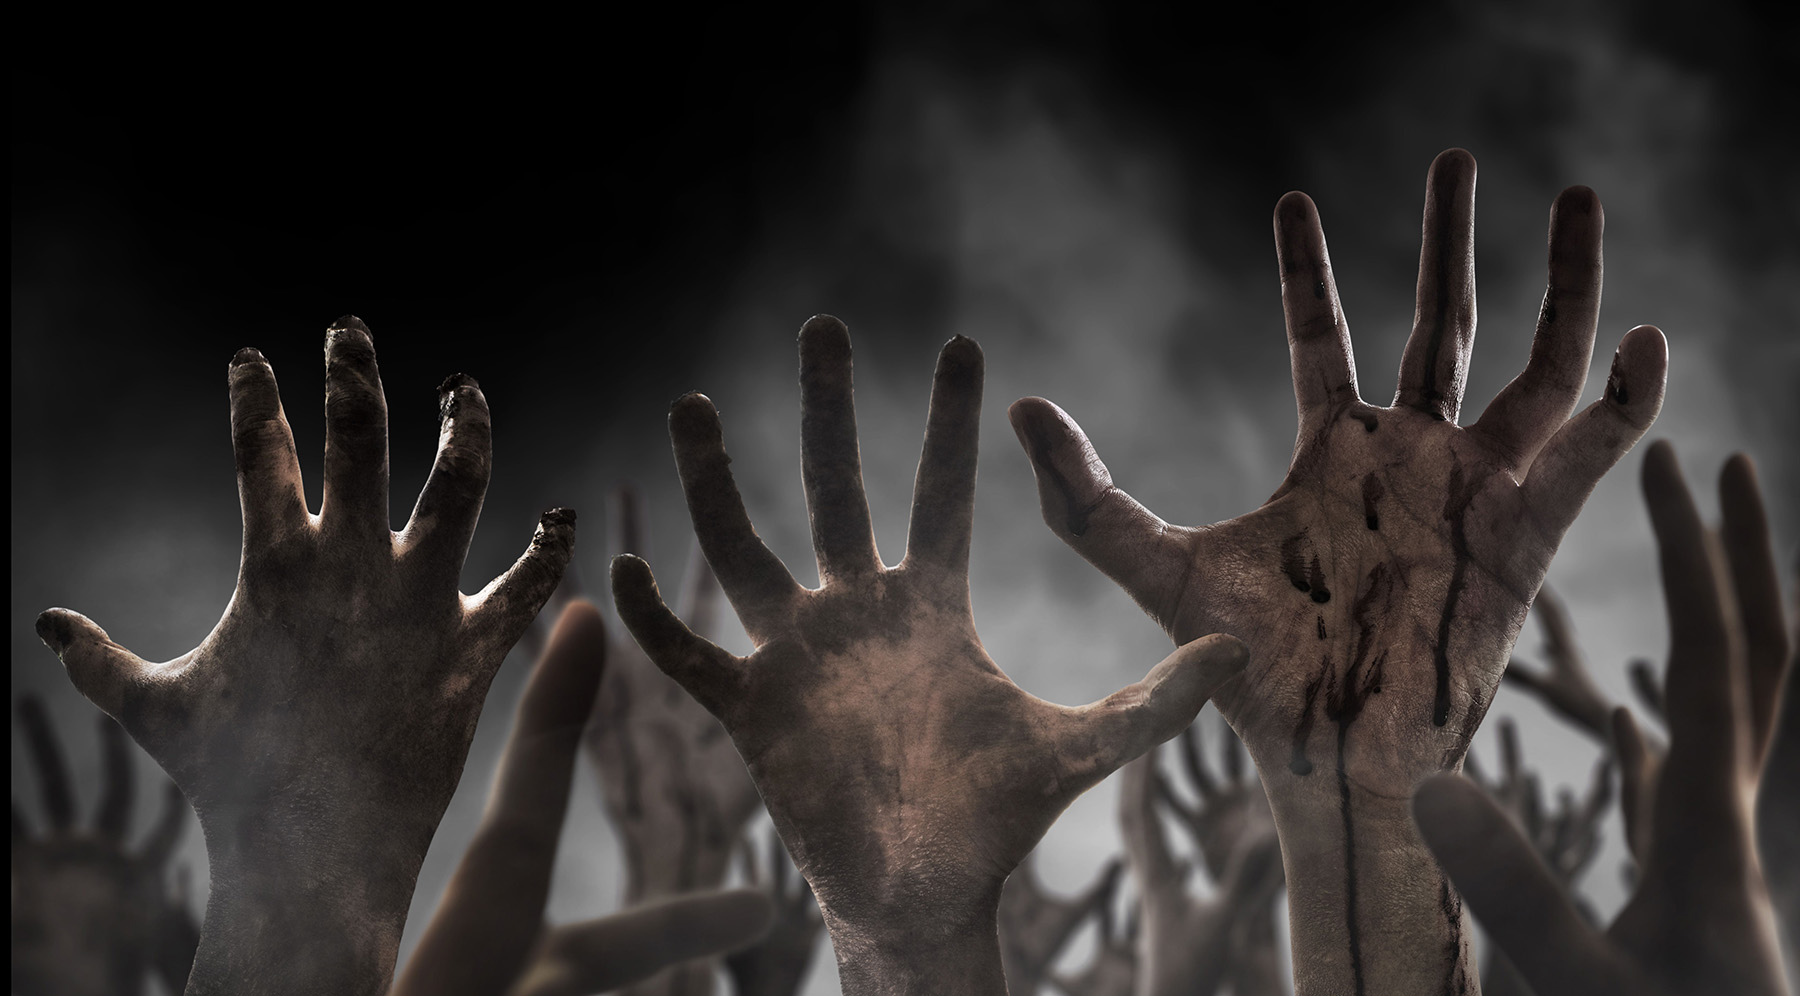 Many scary zombie hands reaching up against a grey, smokey background